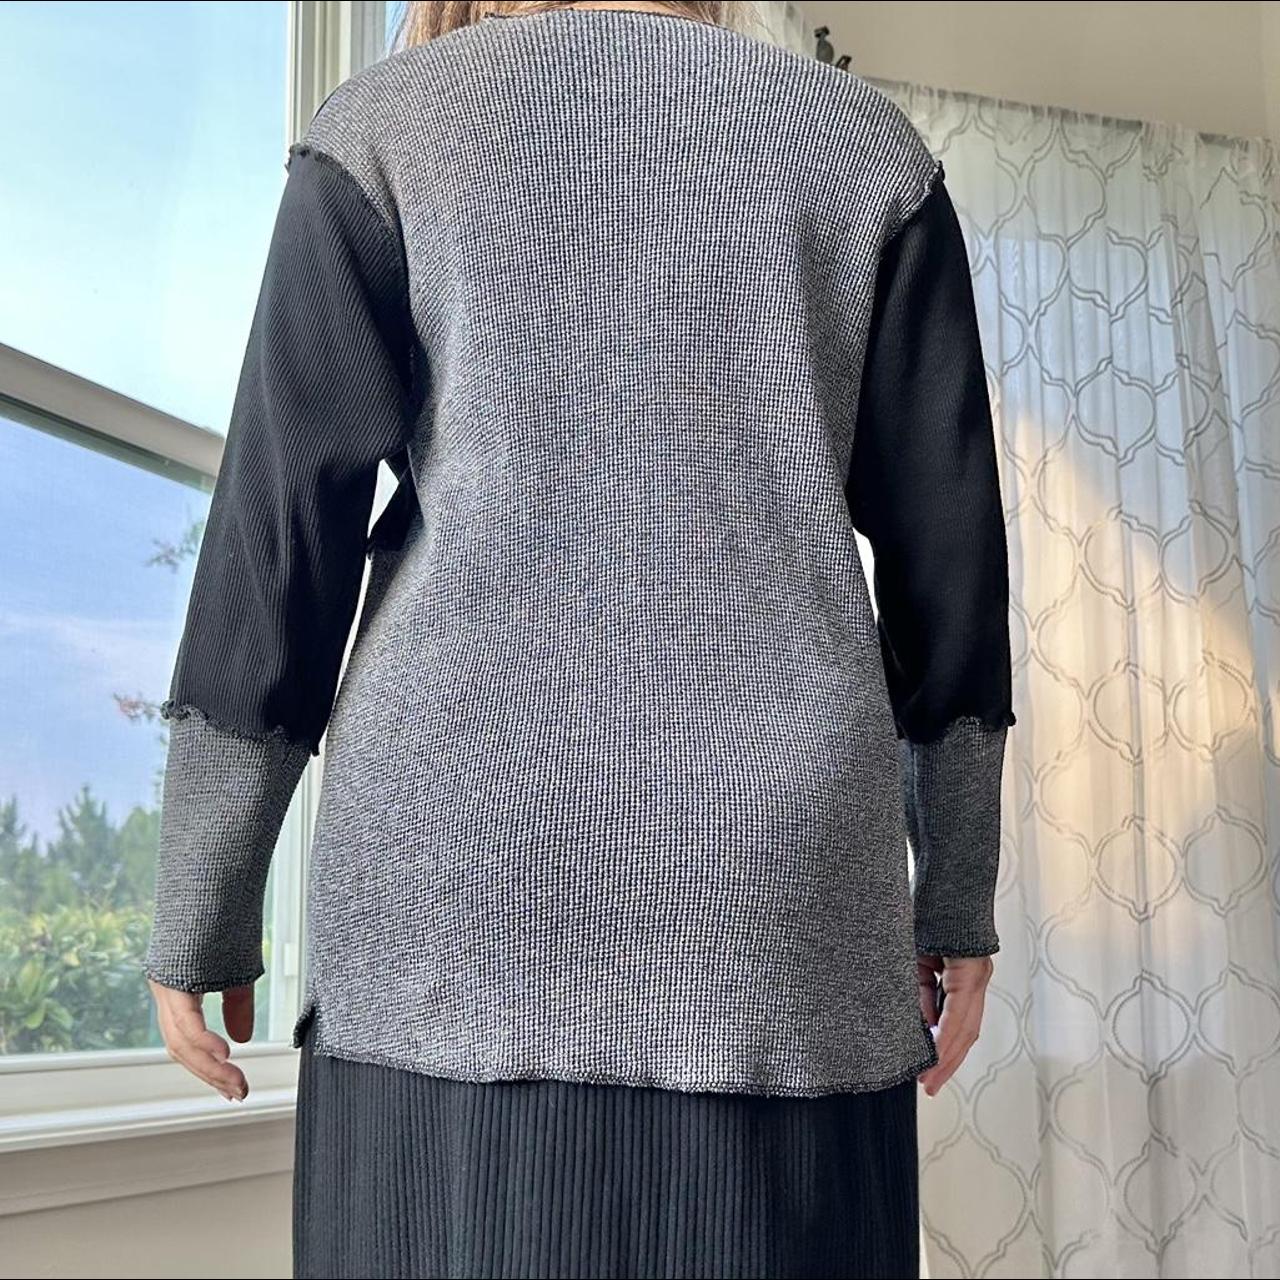 Chaus Women's Black and Grey Jumper